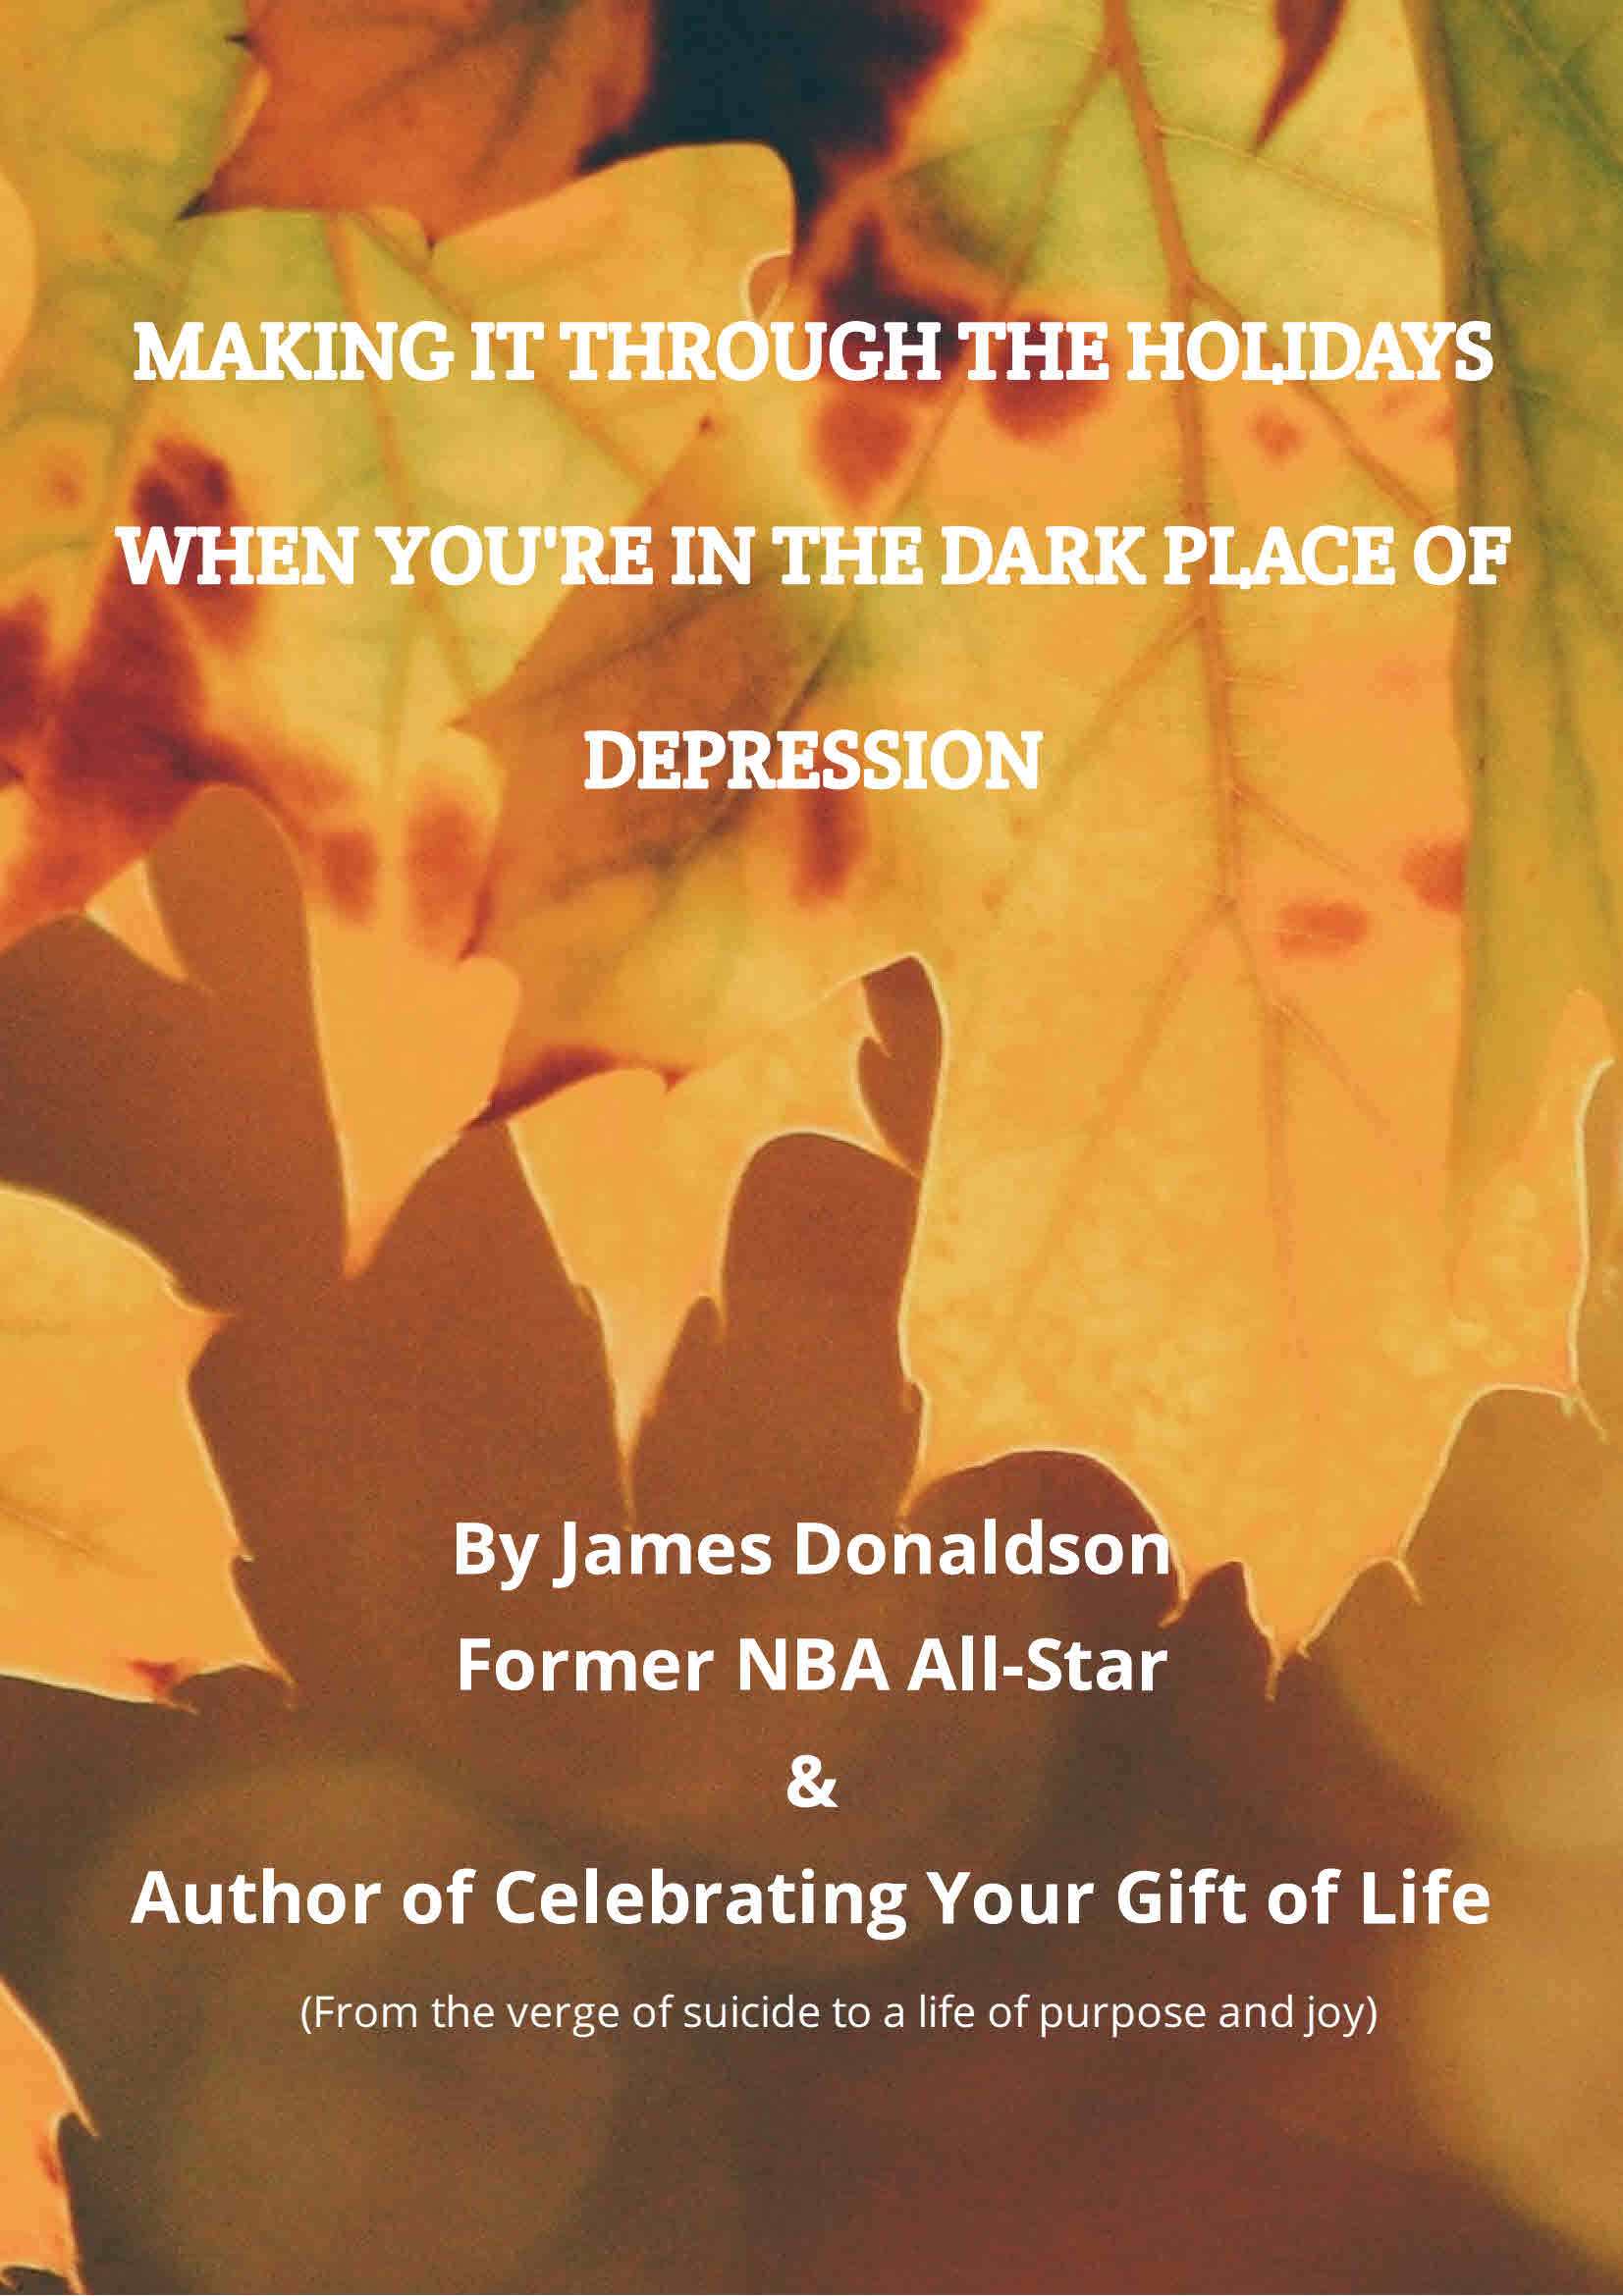 James Donaldson On Mental Health - Get Your Free Ebook Copy of "Making It Through The Holidays When You're in The Dark Place of Depression"